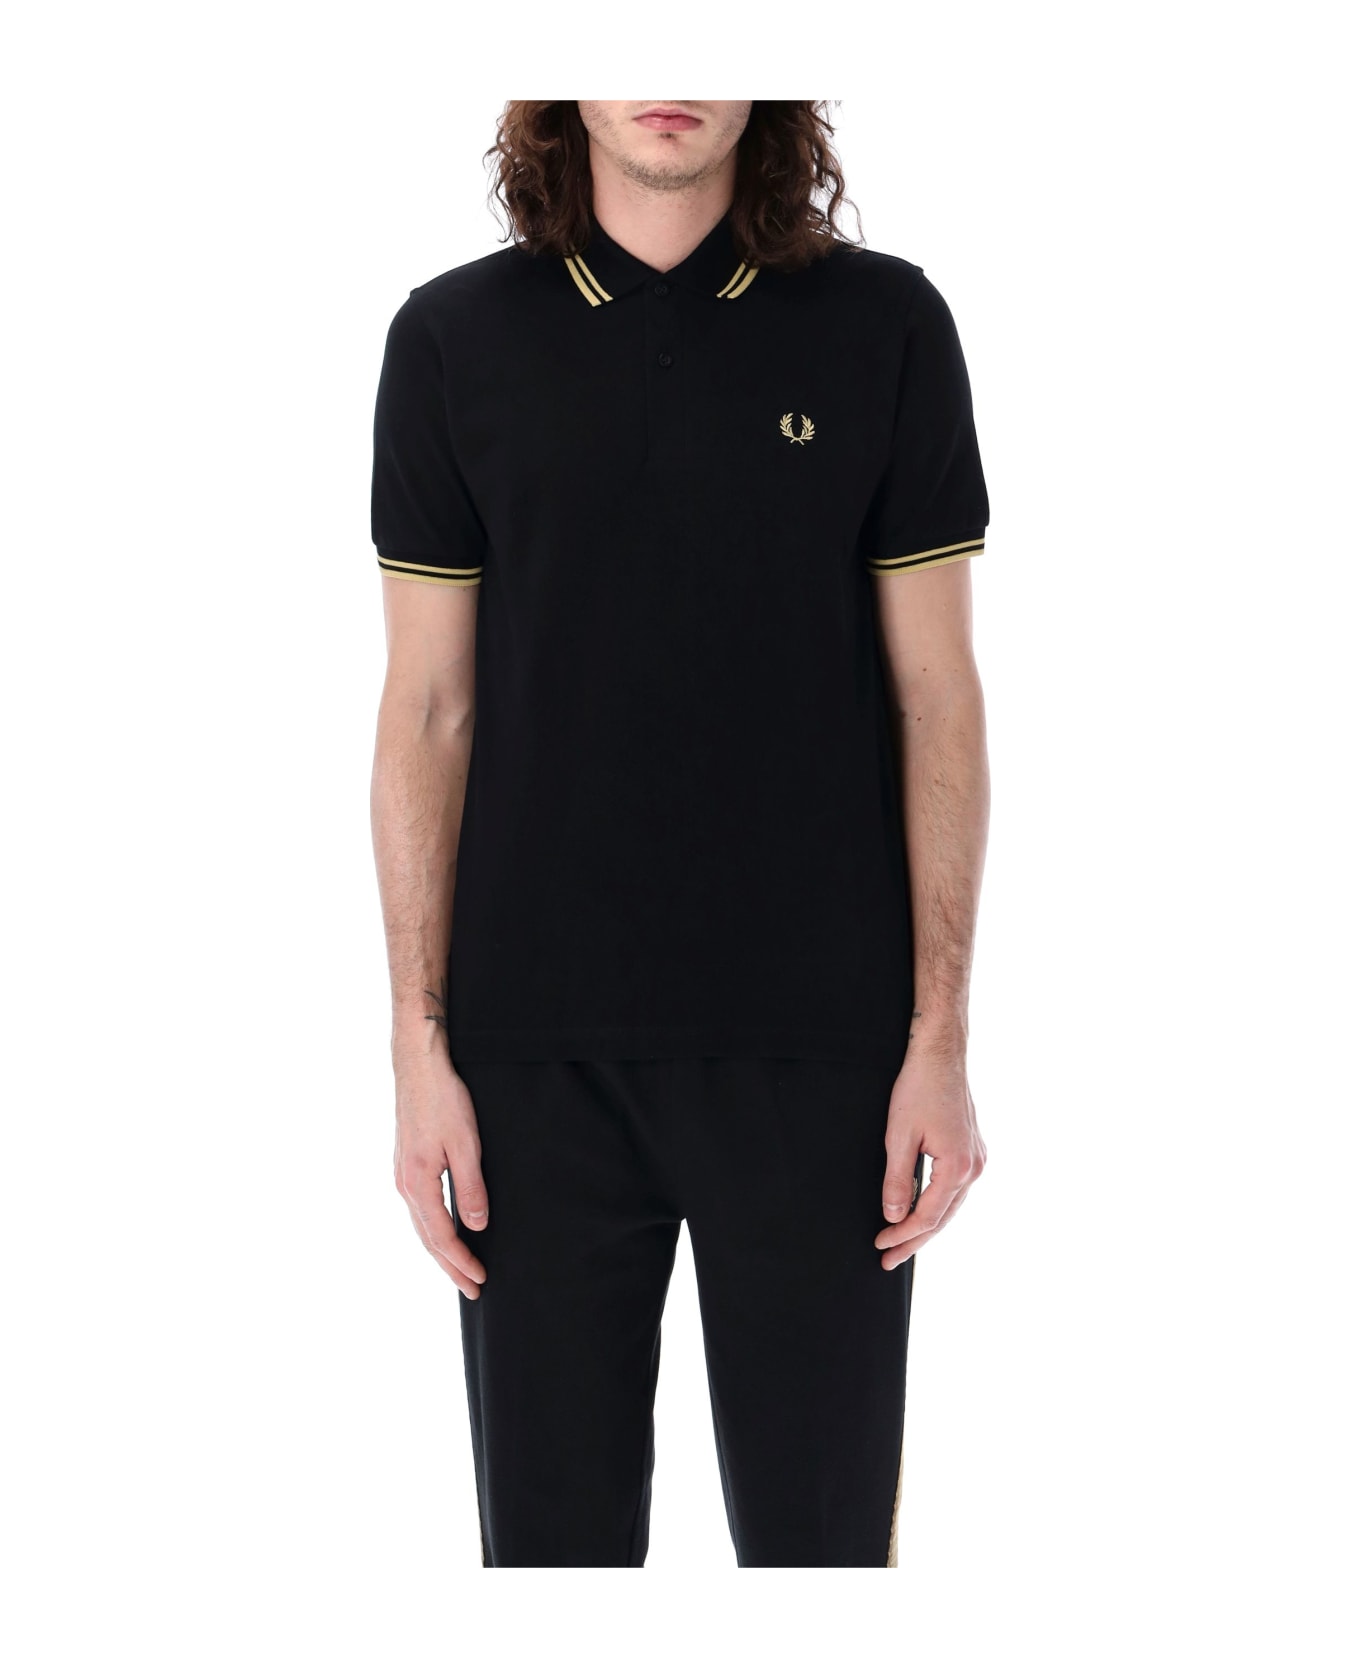 Fred Perry The Original Twin Tipped Piqué Polo Shirt - BLACK CHAMPAGNE